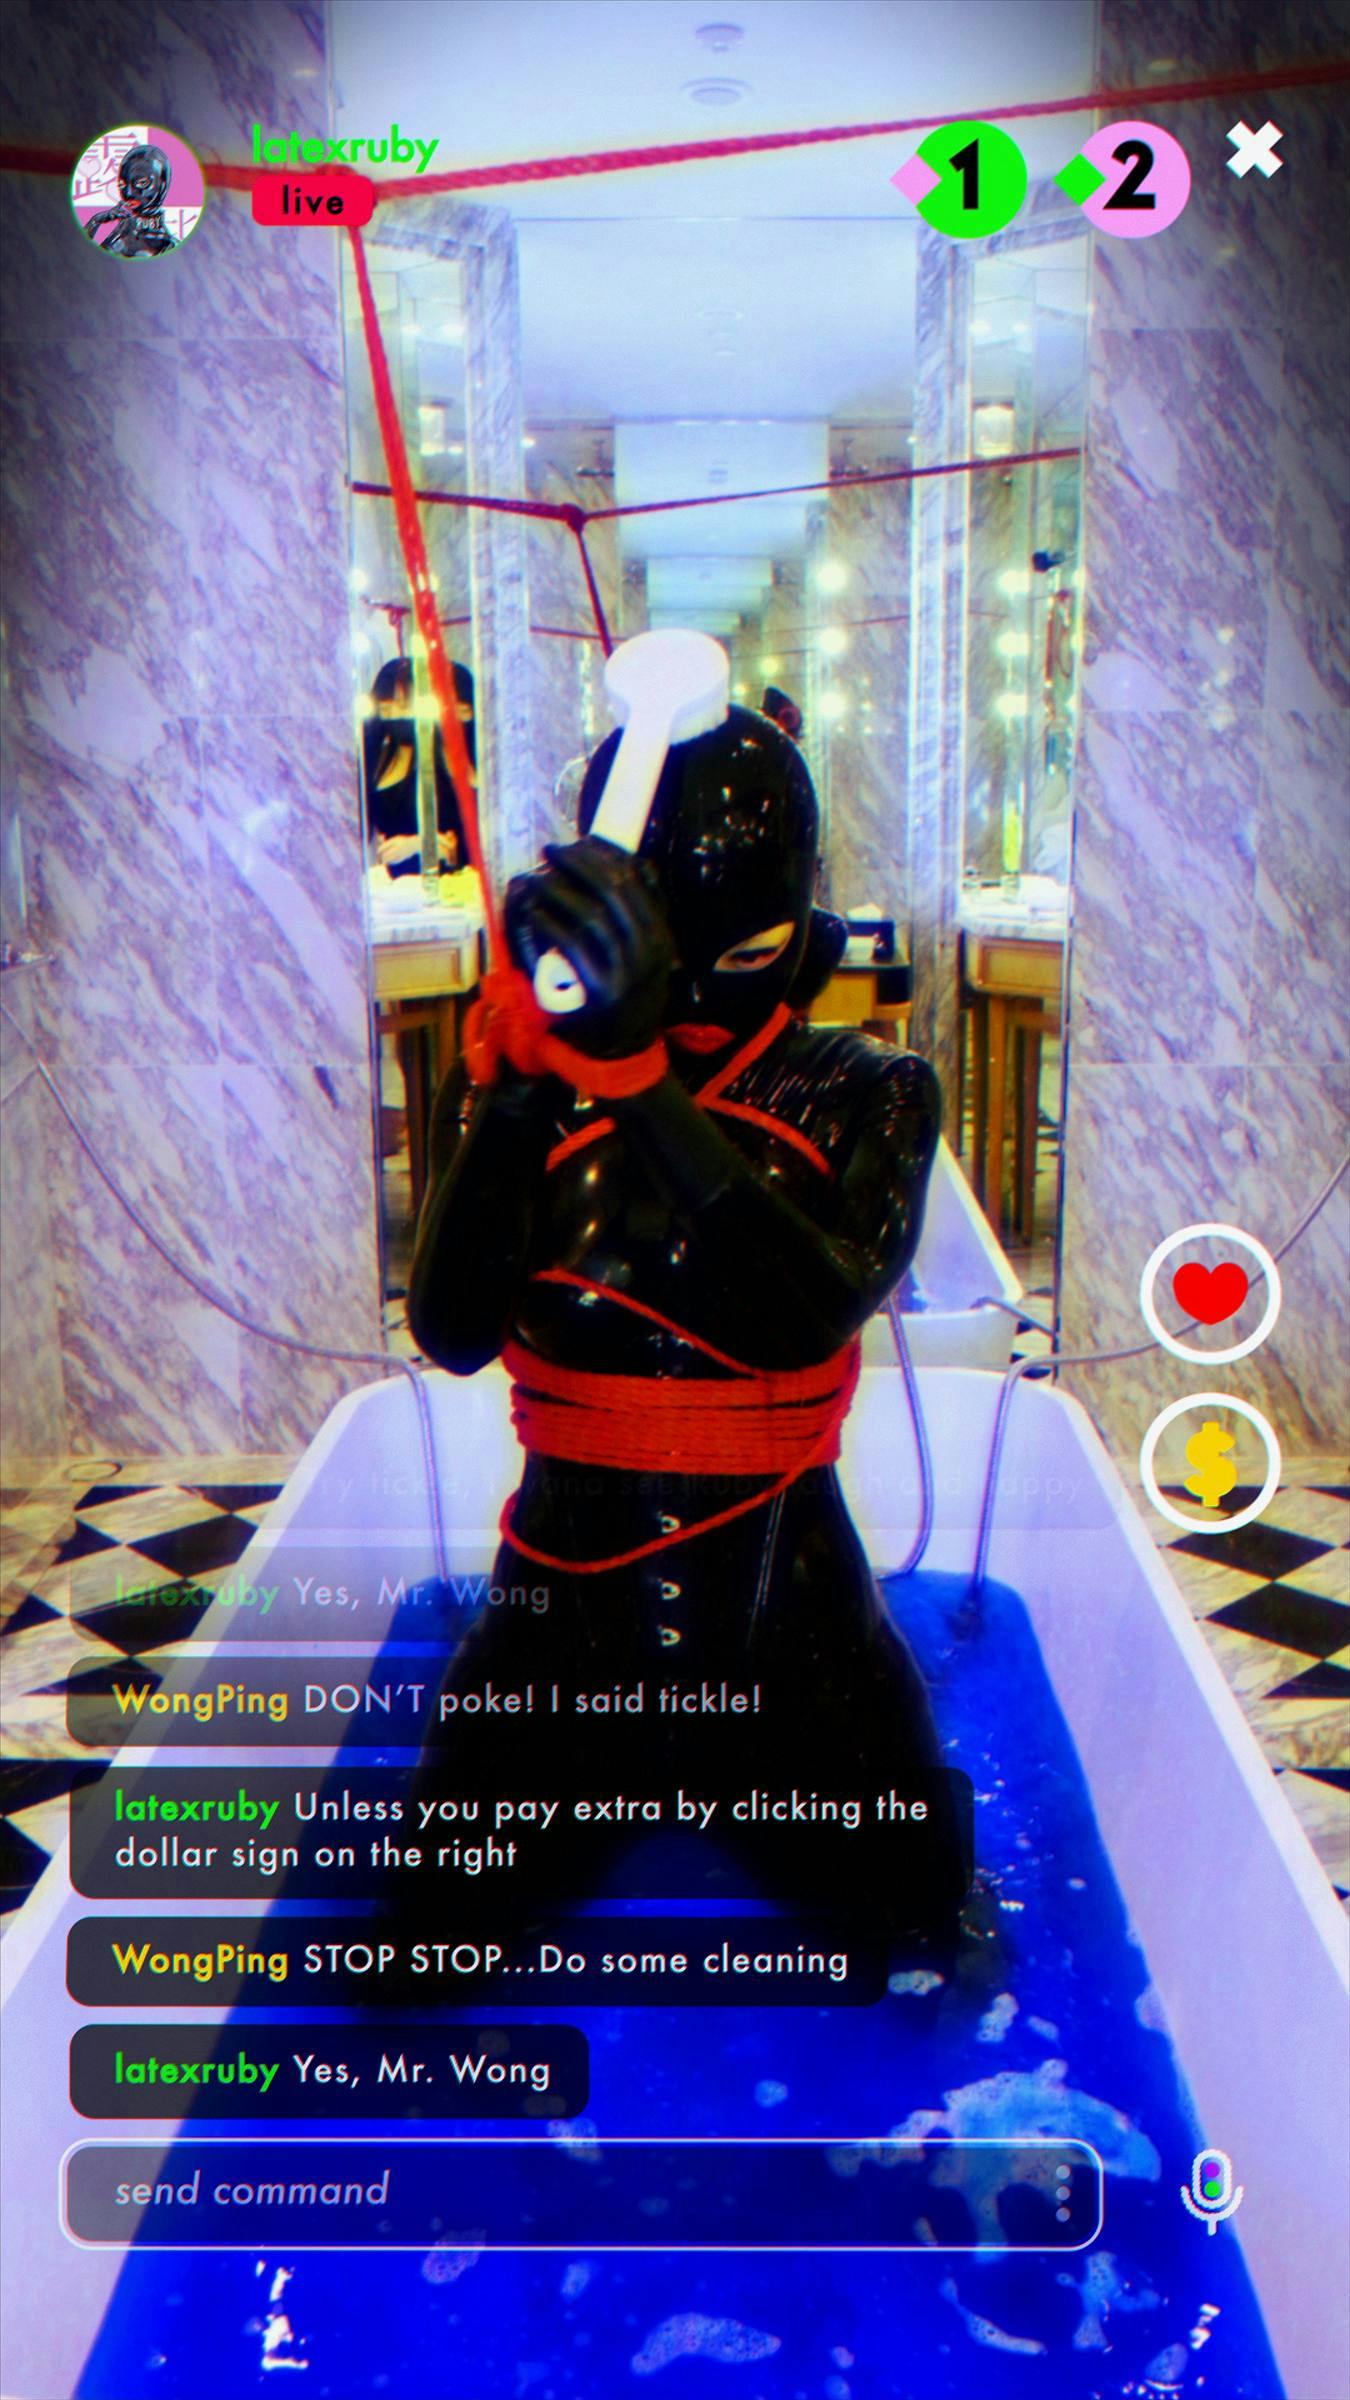 a figure wearing a black latex bondage suit kneels in a bath tub of blue liquid. A 'live' chat is  taking place between Latex Ruby and the artist Wong Ping. It looks as though we are looking at the screen of someone's phone.